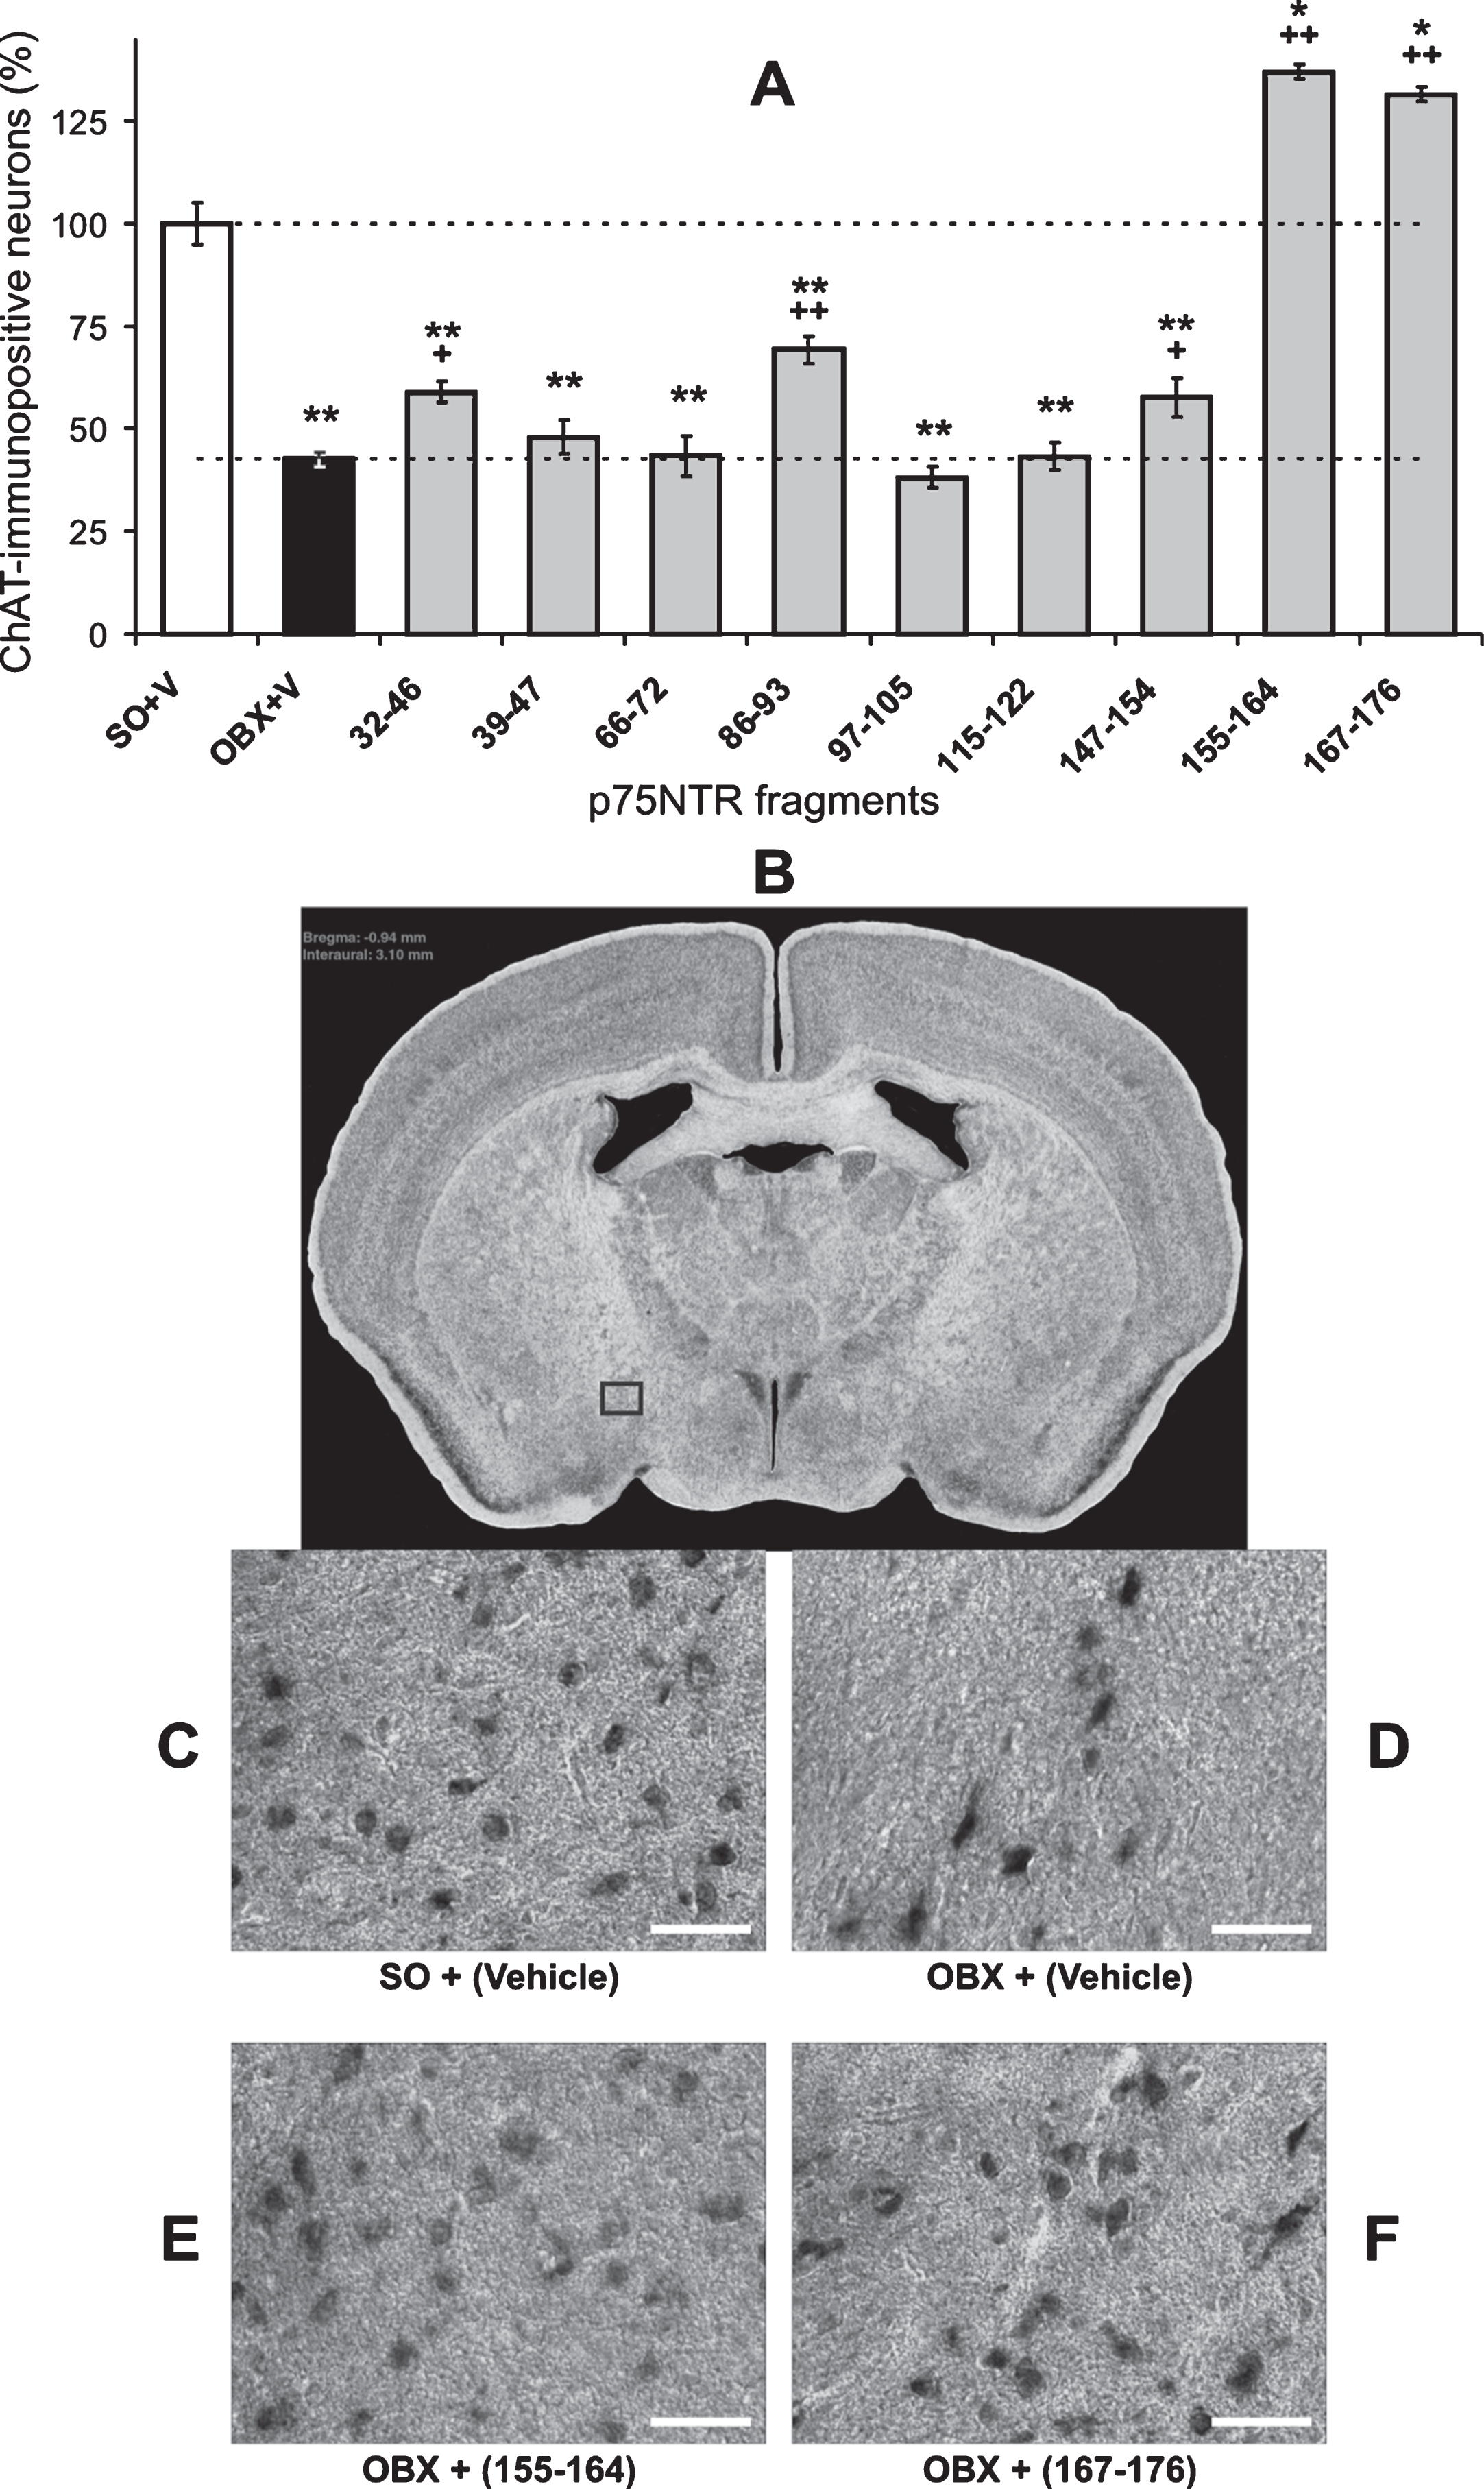 Detrimental effect of olfactory bulbectomy (OBX) in mice on the density of choline acetyltransferase (ChAT)-containing neurons in the forebrain, beneficial effects of the immunization against the p75NTR amino acid residues of 32–46, 86–93, and 147–154, and overgrowing effects of the treatment with 155–164 and 167–176 fragments. The immunoreactive labeling against ChAT in the nucleus basalis magnocellularis on the representative examples (taken from the area marked by a rectangle on B) demonstrates decreased number of the labeled cells after the bulbectomy (c.f., C and D) and their recovery after the immunization against the fragments of 155–164 (E) and 167–176 (F). White horizontal bars in C-F are the scale bars of 50 μm. On A, error bars show 1 SEM; star or plus denote significant differences versus either SO or OBX, respectively (one and two markers are p < 0.05 and 0.01, Mann-Whitney U-test). The brain slice on B was modified from [40].